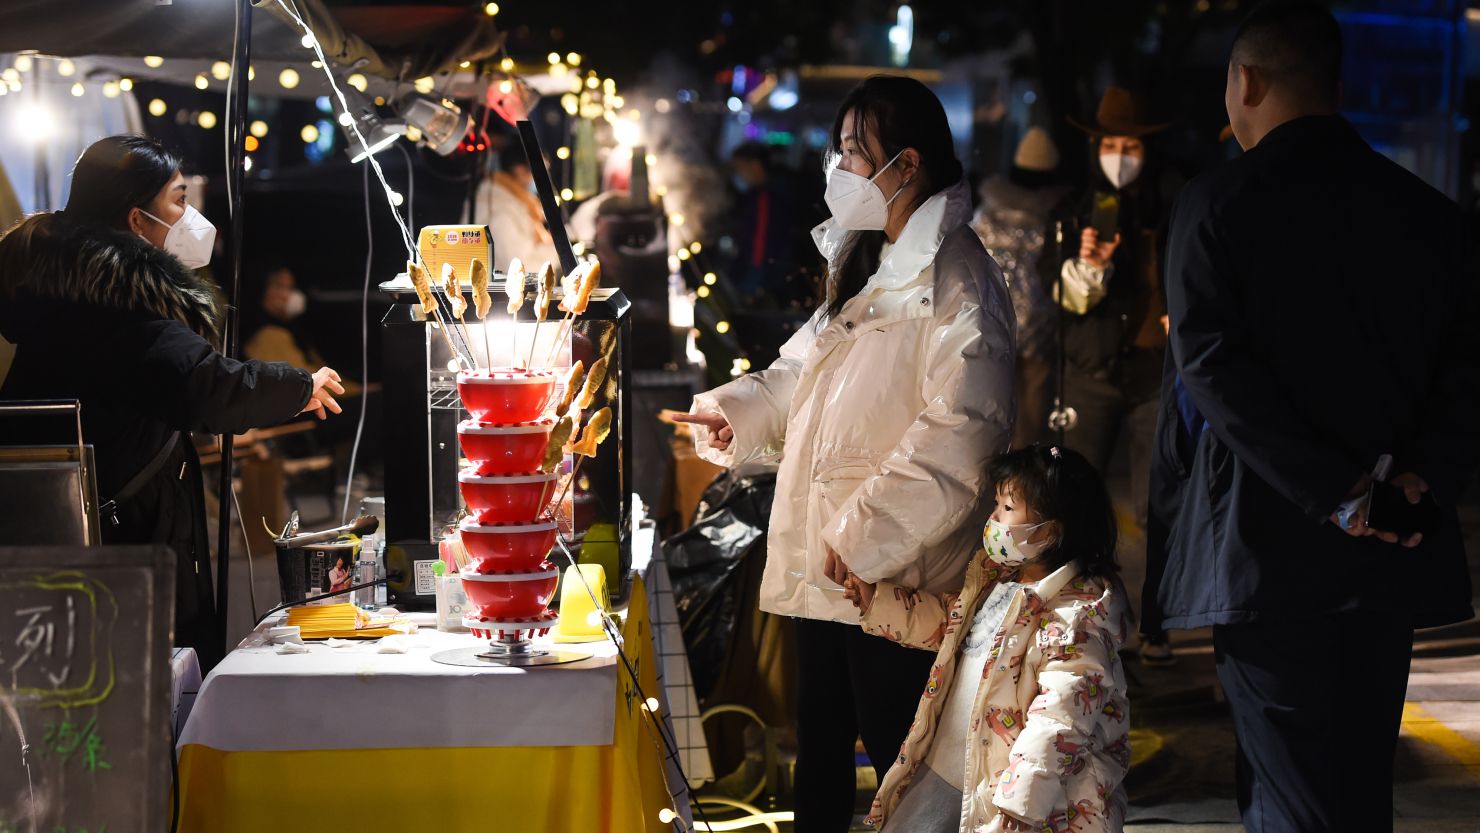 Residents purchase snacks at a night market in Chongqing, China, on December 14.